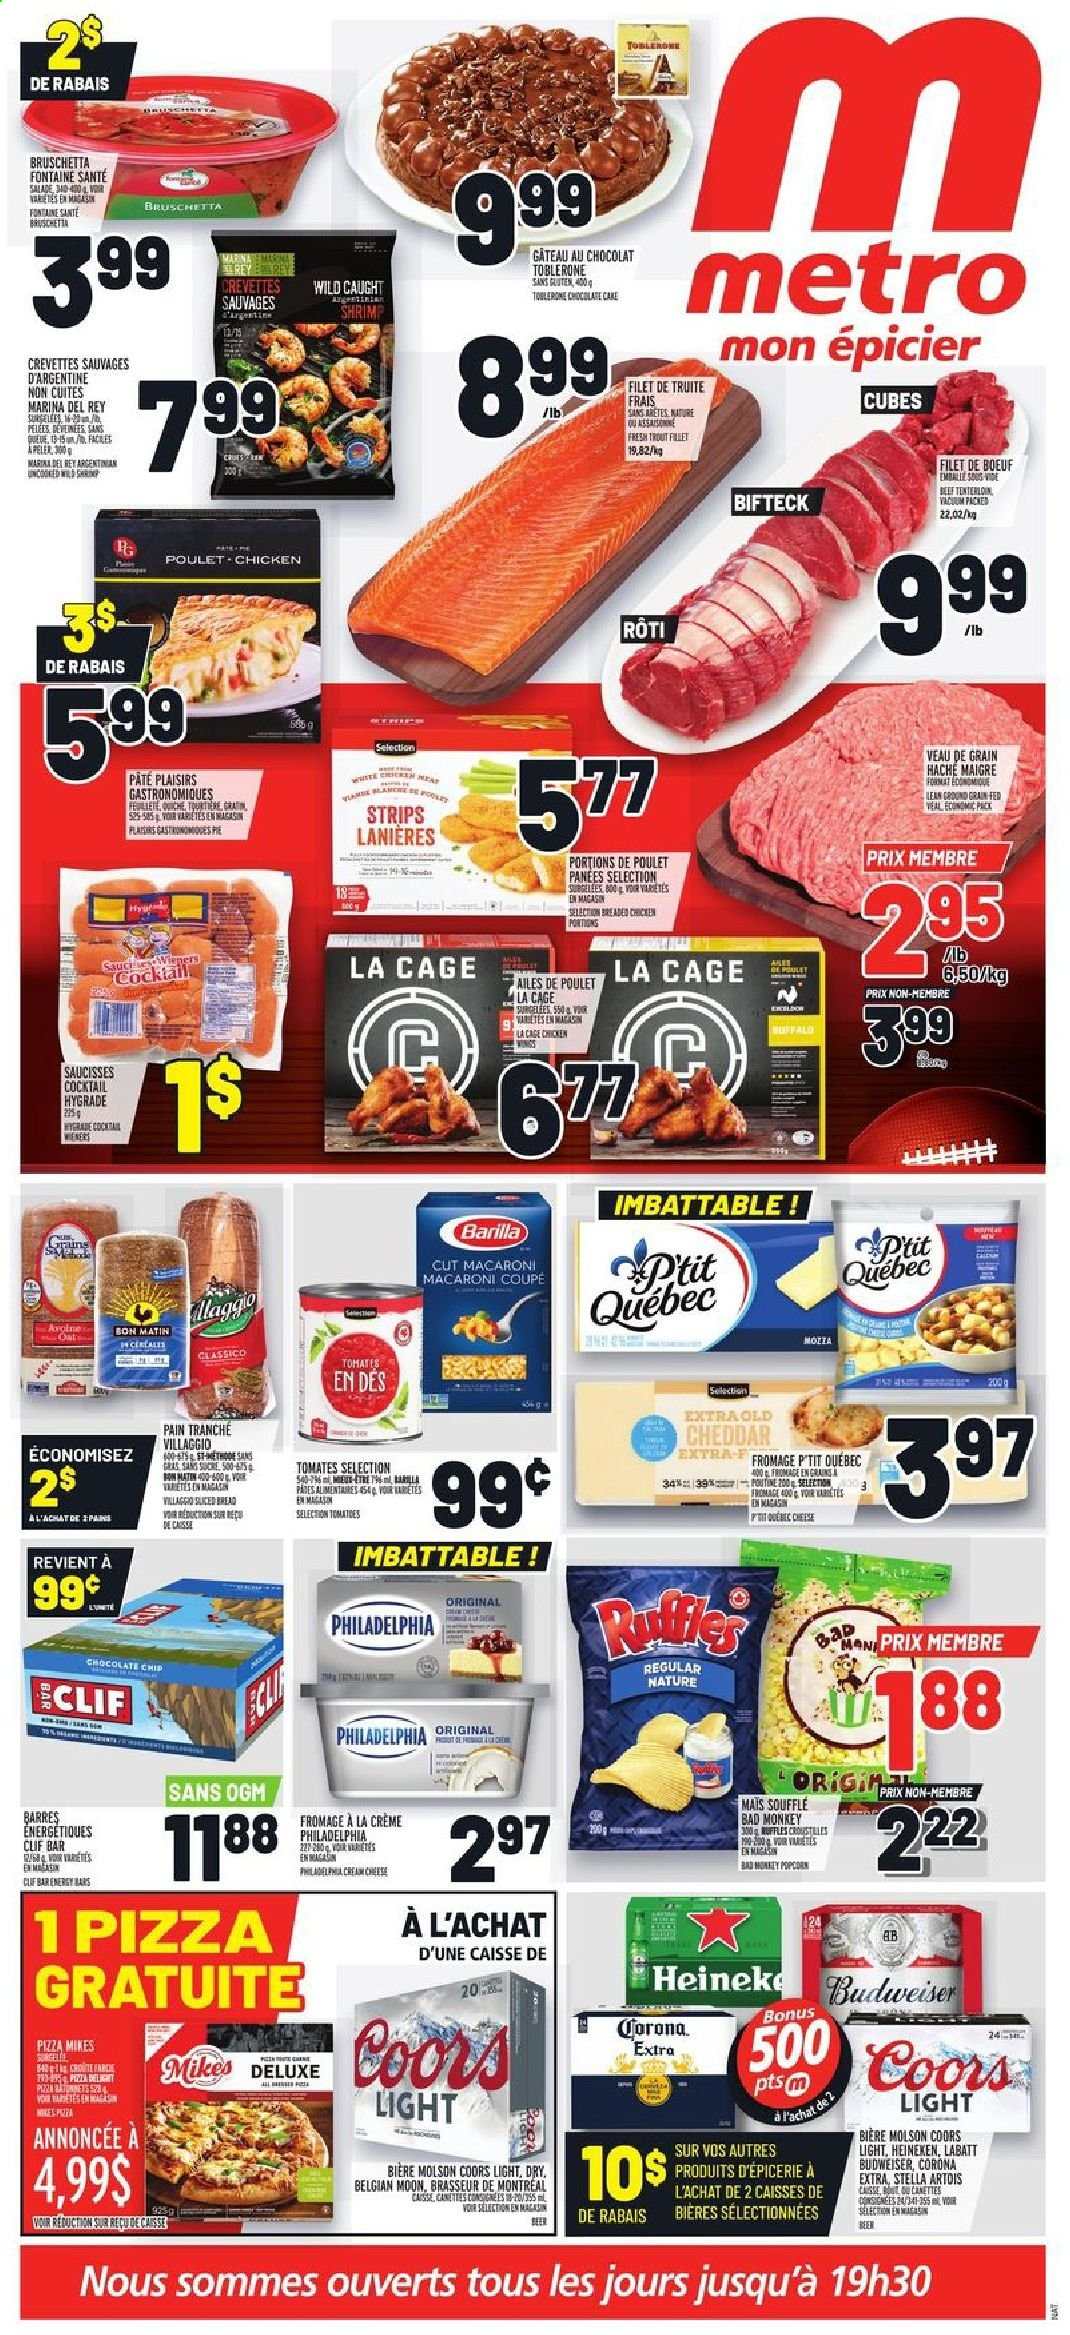 thumbnail - Metro Flyer - February 04, 2021 - February 10, 2021 - Sales products - cake, chocolate cake, trout, shrimps, pizza, macaroni, fried chicken, Barilla, bruschetta, cheddar, strips, chocolate chips, Toblerone, popcorn, energy bar, Classico, beer, Corona Extra, Heineken, cage, Stella Artois, Coors. Page 1.